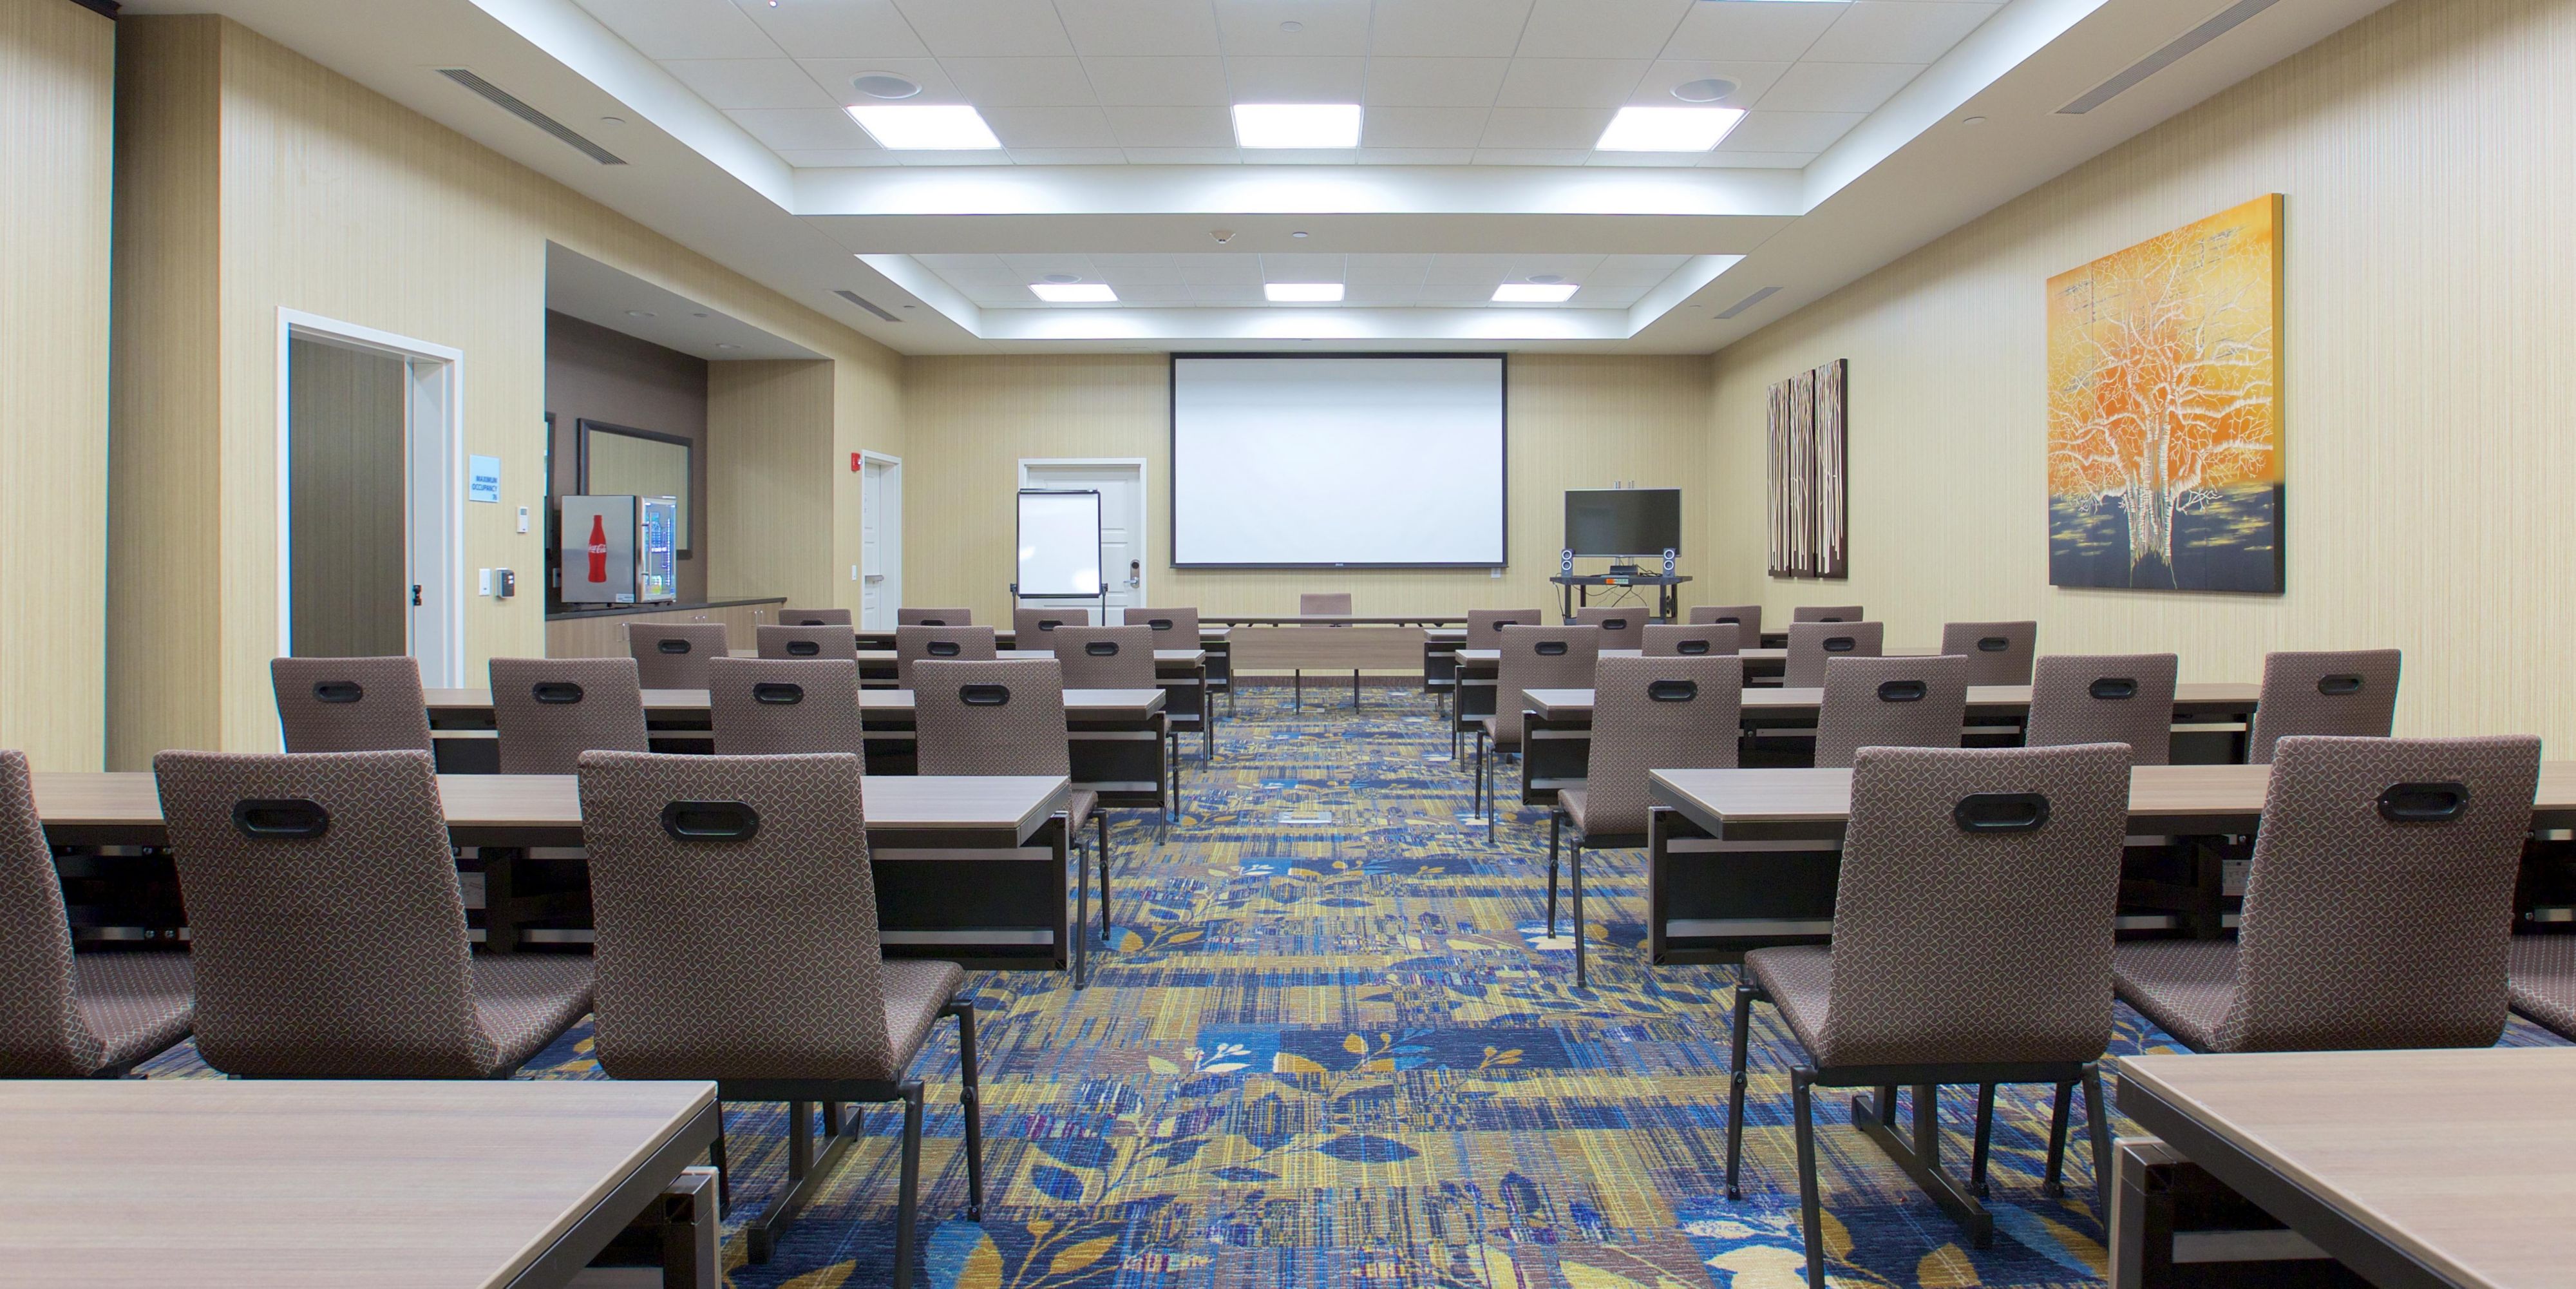 Our property offers 1,100 square feet of flexible first-floor meeting space, perfect for small meetings and events that can accommodate up to 70 guests! Contact us for more information. 